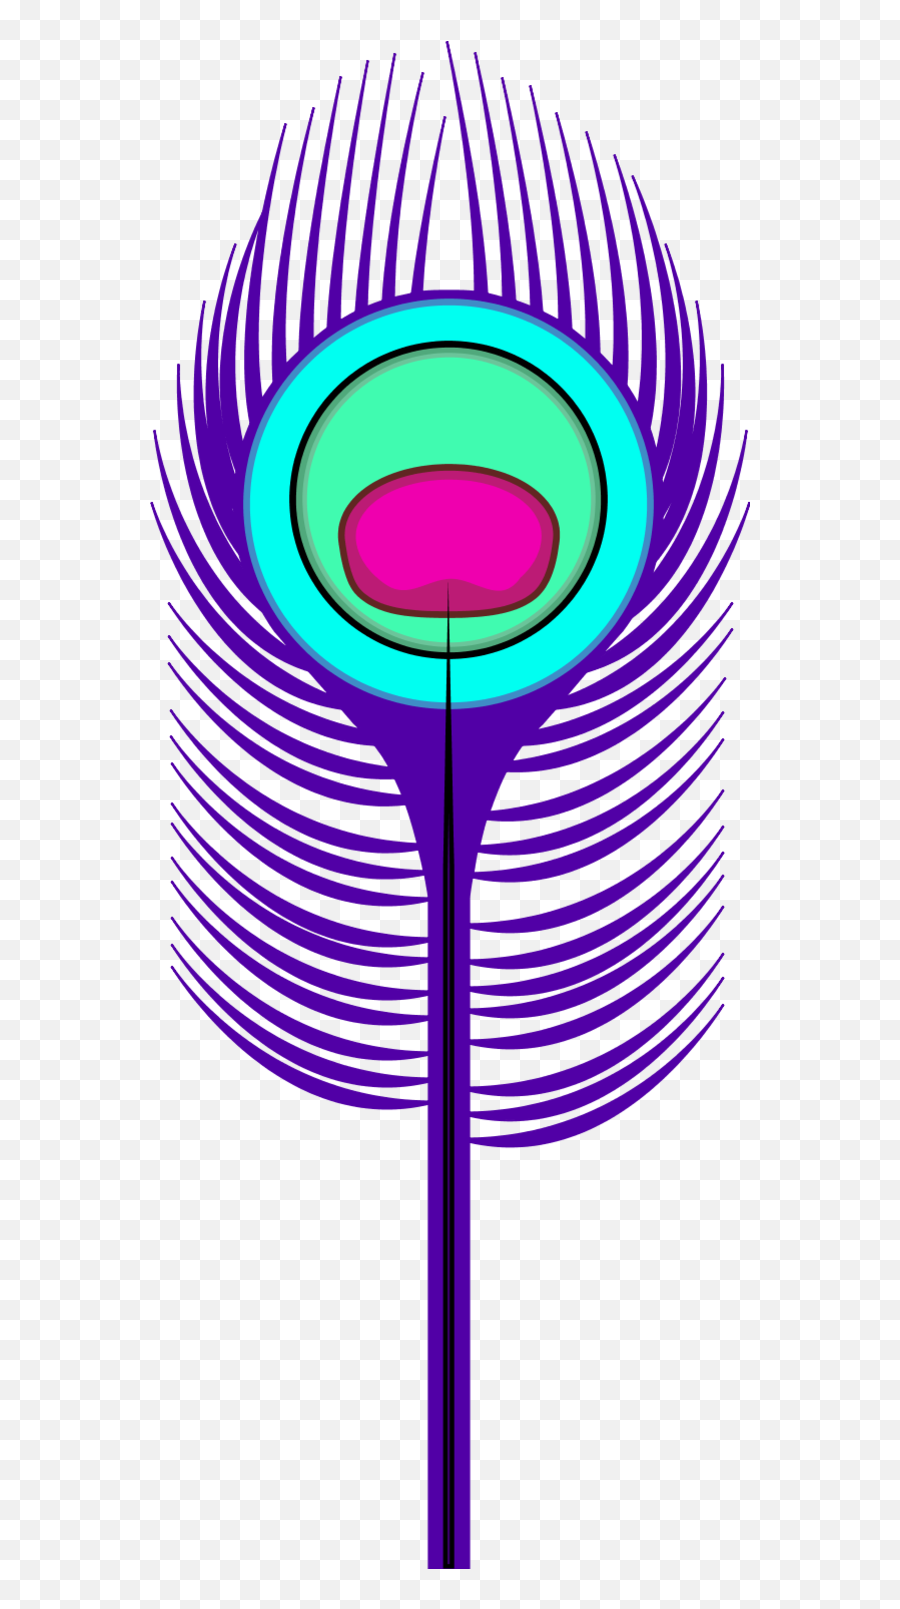 Black Peacock Feather Clip Art Drawing - Purple Peacock Feather Art Emoji,Peacock Feather Ascii Emoticon